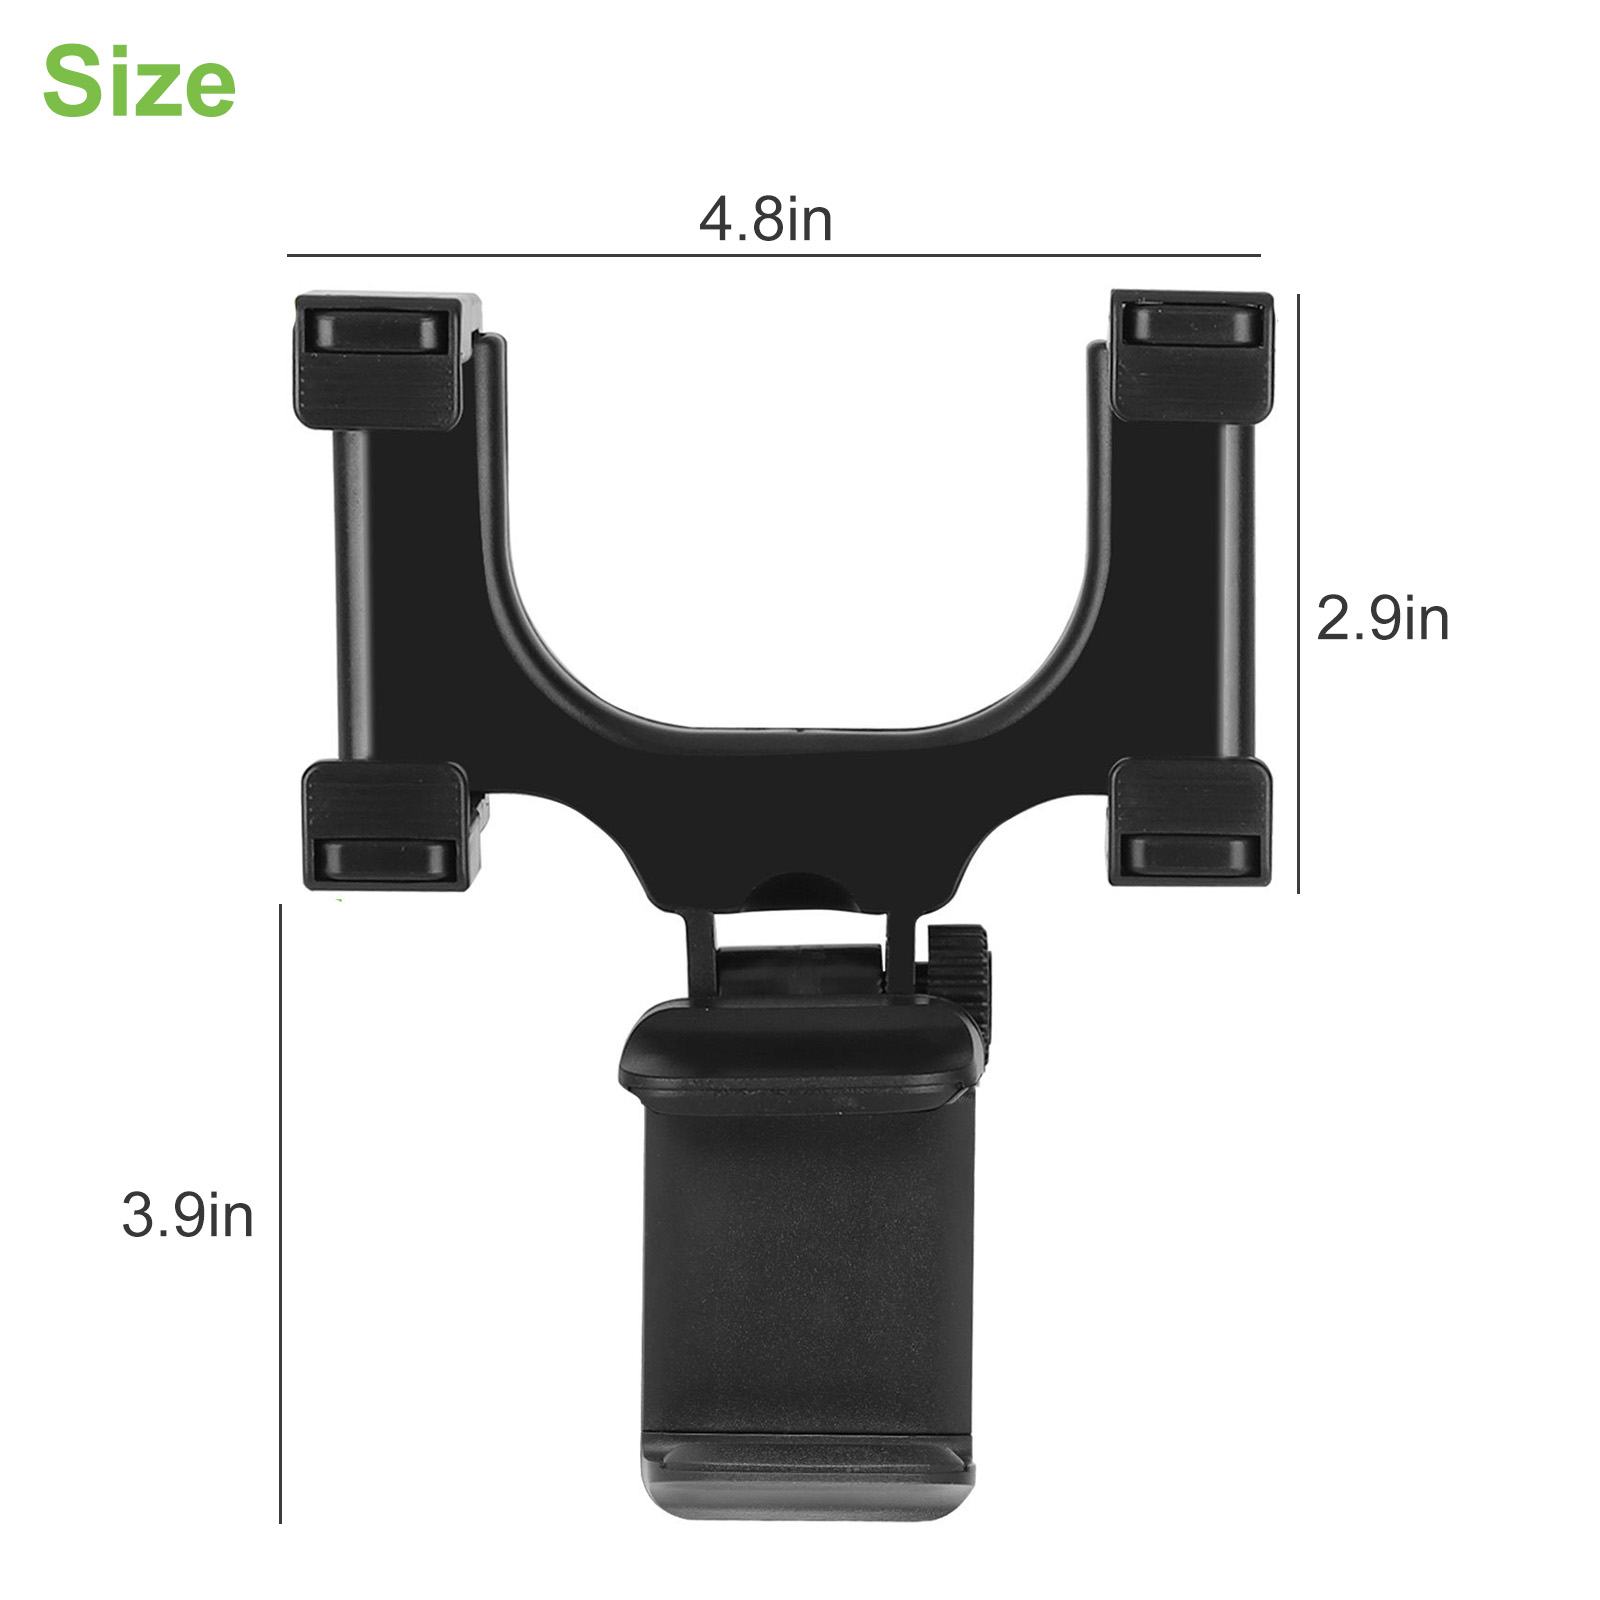 TSV Car Rear View Mirror Mount Grip Clip, 240 Rotation Car Mount Holder, Universal Smartphone Holders Cell Phone Mount Fit for iPhone 13/12/11 Pro Xr Xs Max X, Samsung S21/Galaxy, HTC, GPS, Smartphone - image 8 of 9